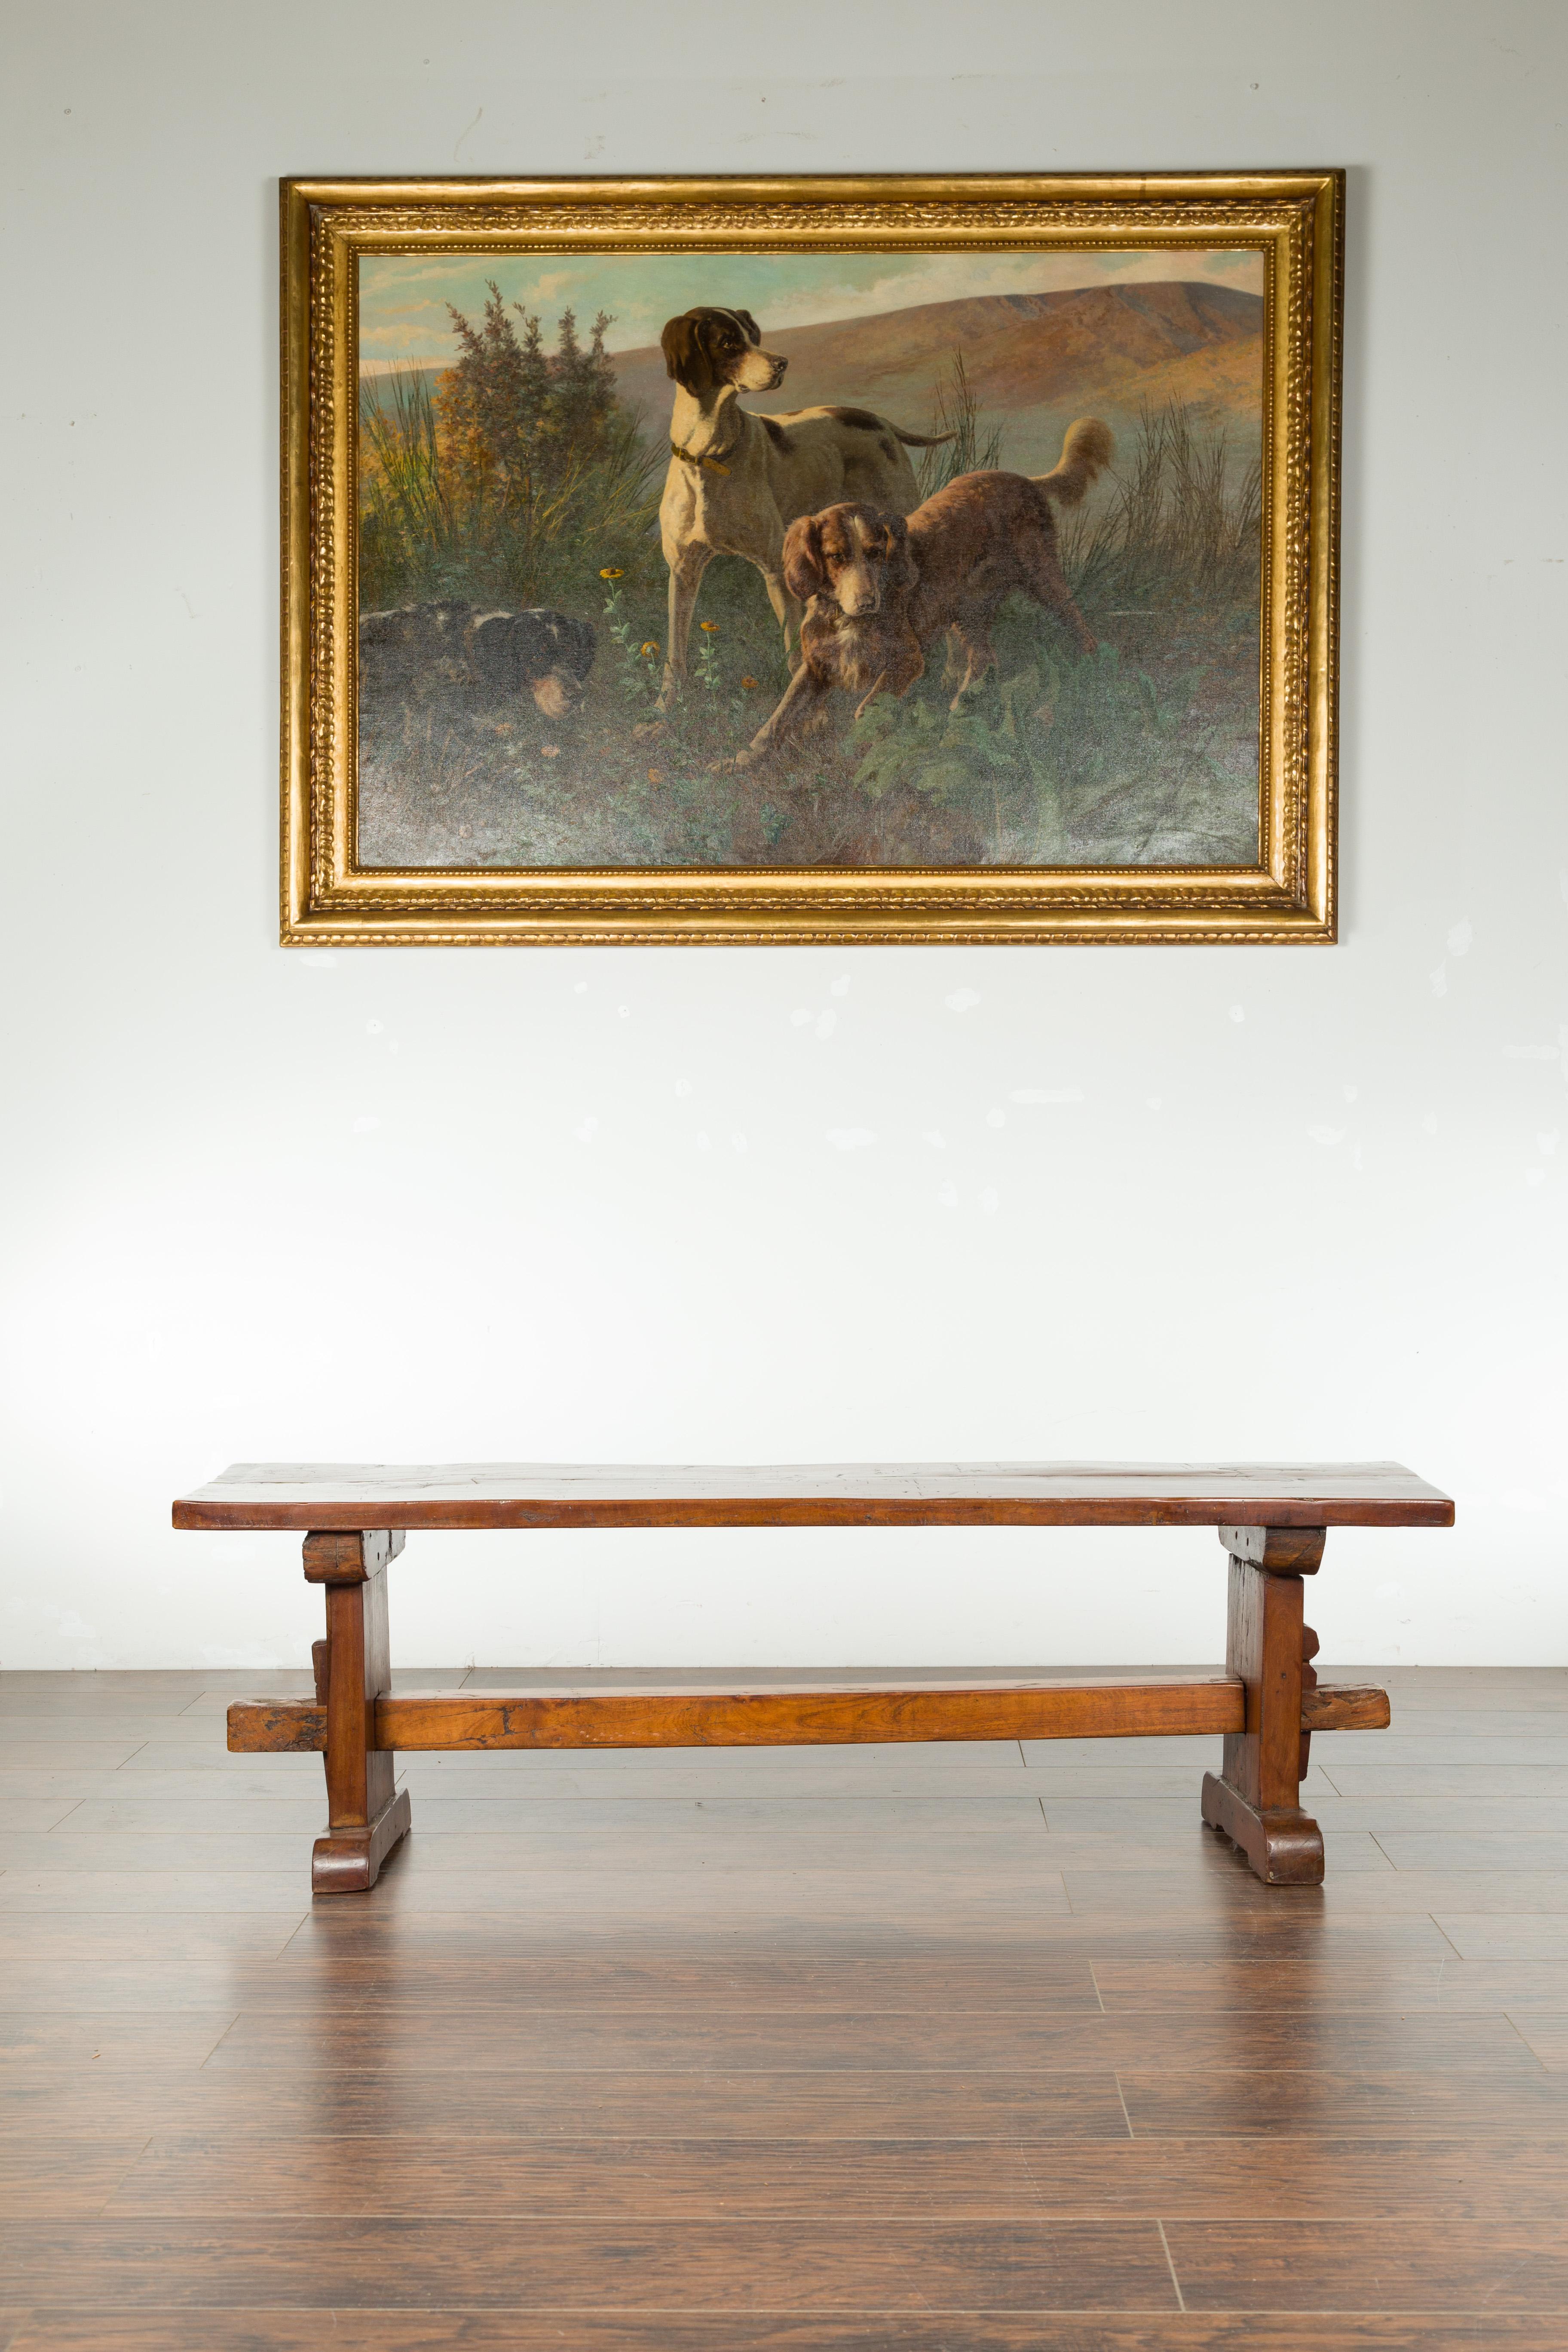 Rustic Italian Walnut Bench with Trestle Base from the Early 19th Century 1